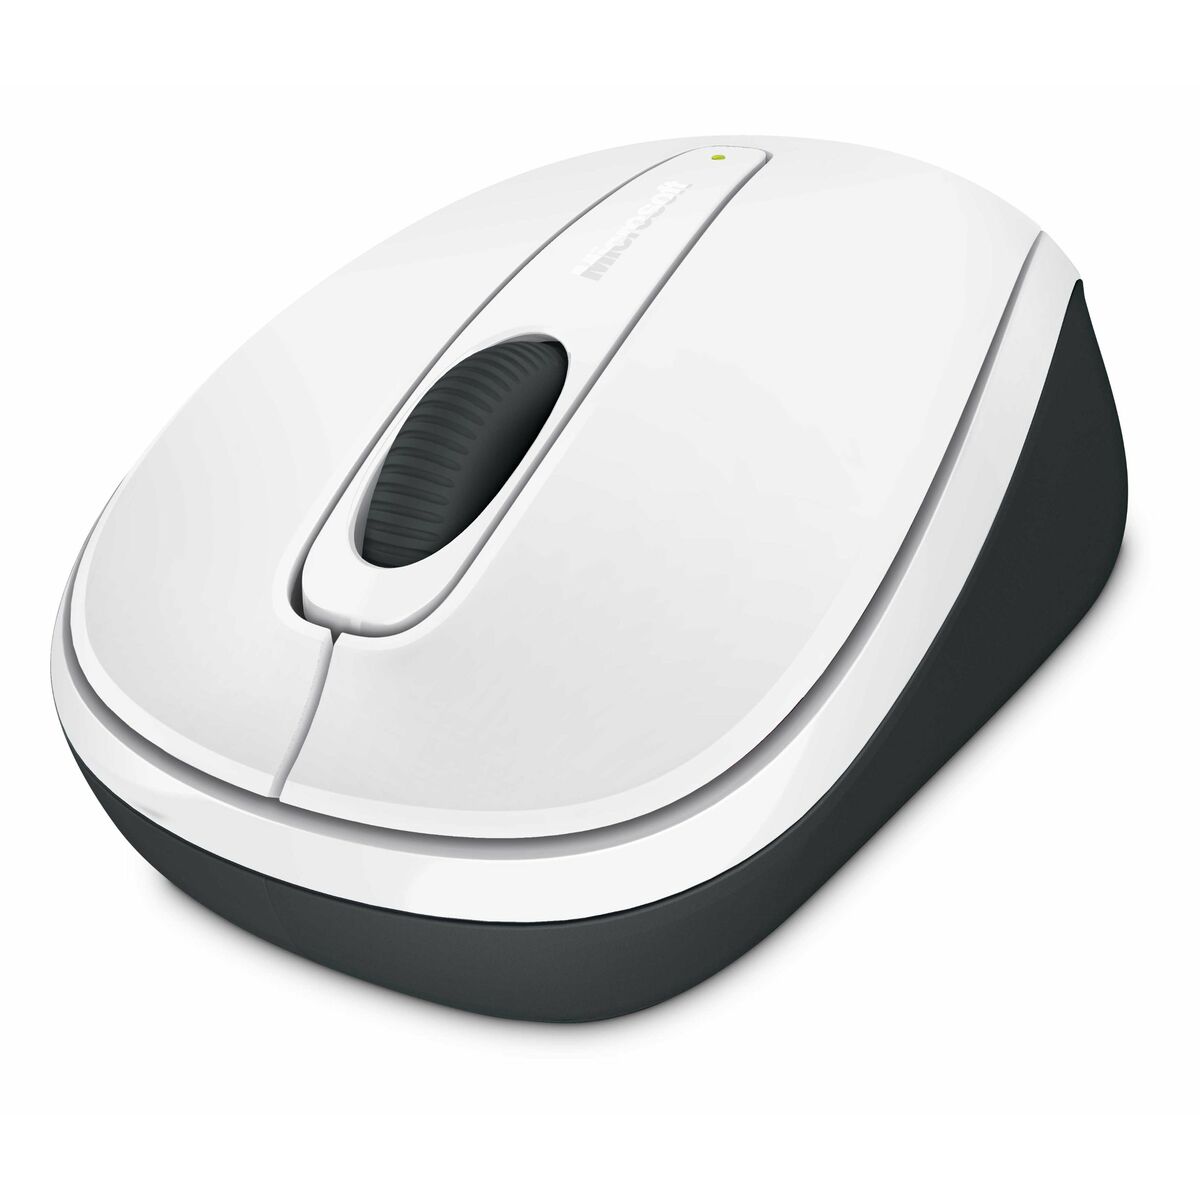 Wireless Mouse Microsoft GMF-00294 Black 1000 dpi, Microsoft, Computing, Accessories, wireless-mouse-microsoft-gmf-00294-black-1000-dpi, Brand_Microsoft, category-reference-2609, category-reference-2642, category-reference-2656, category-reference-t-19685, category-reference-t-19908, category-reference-t-21353, computers / peripherals, Condition_NEW, office, Price_20 - 50, RiotNook